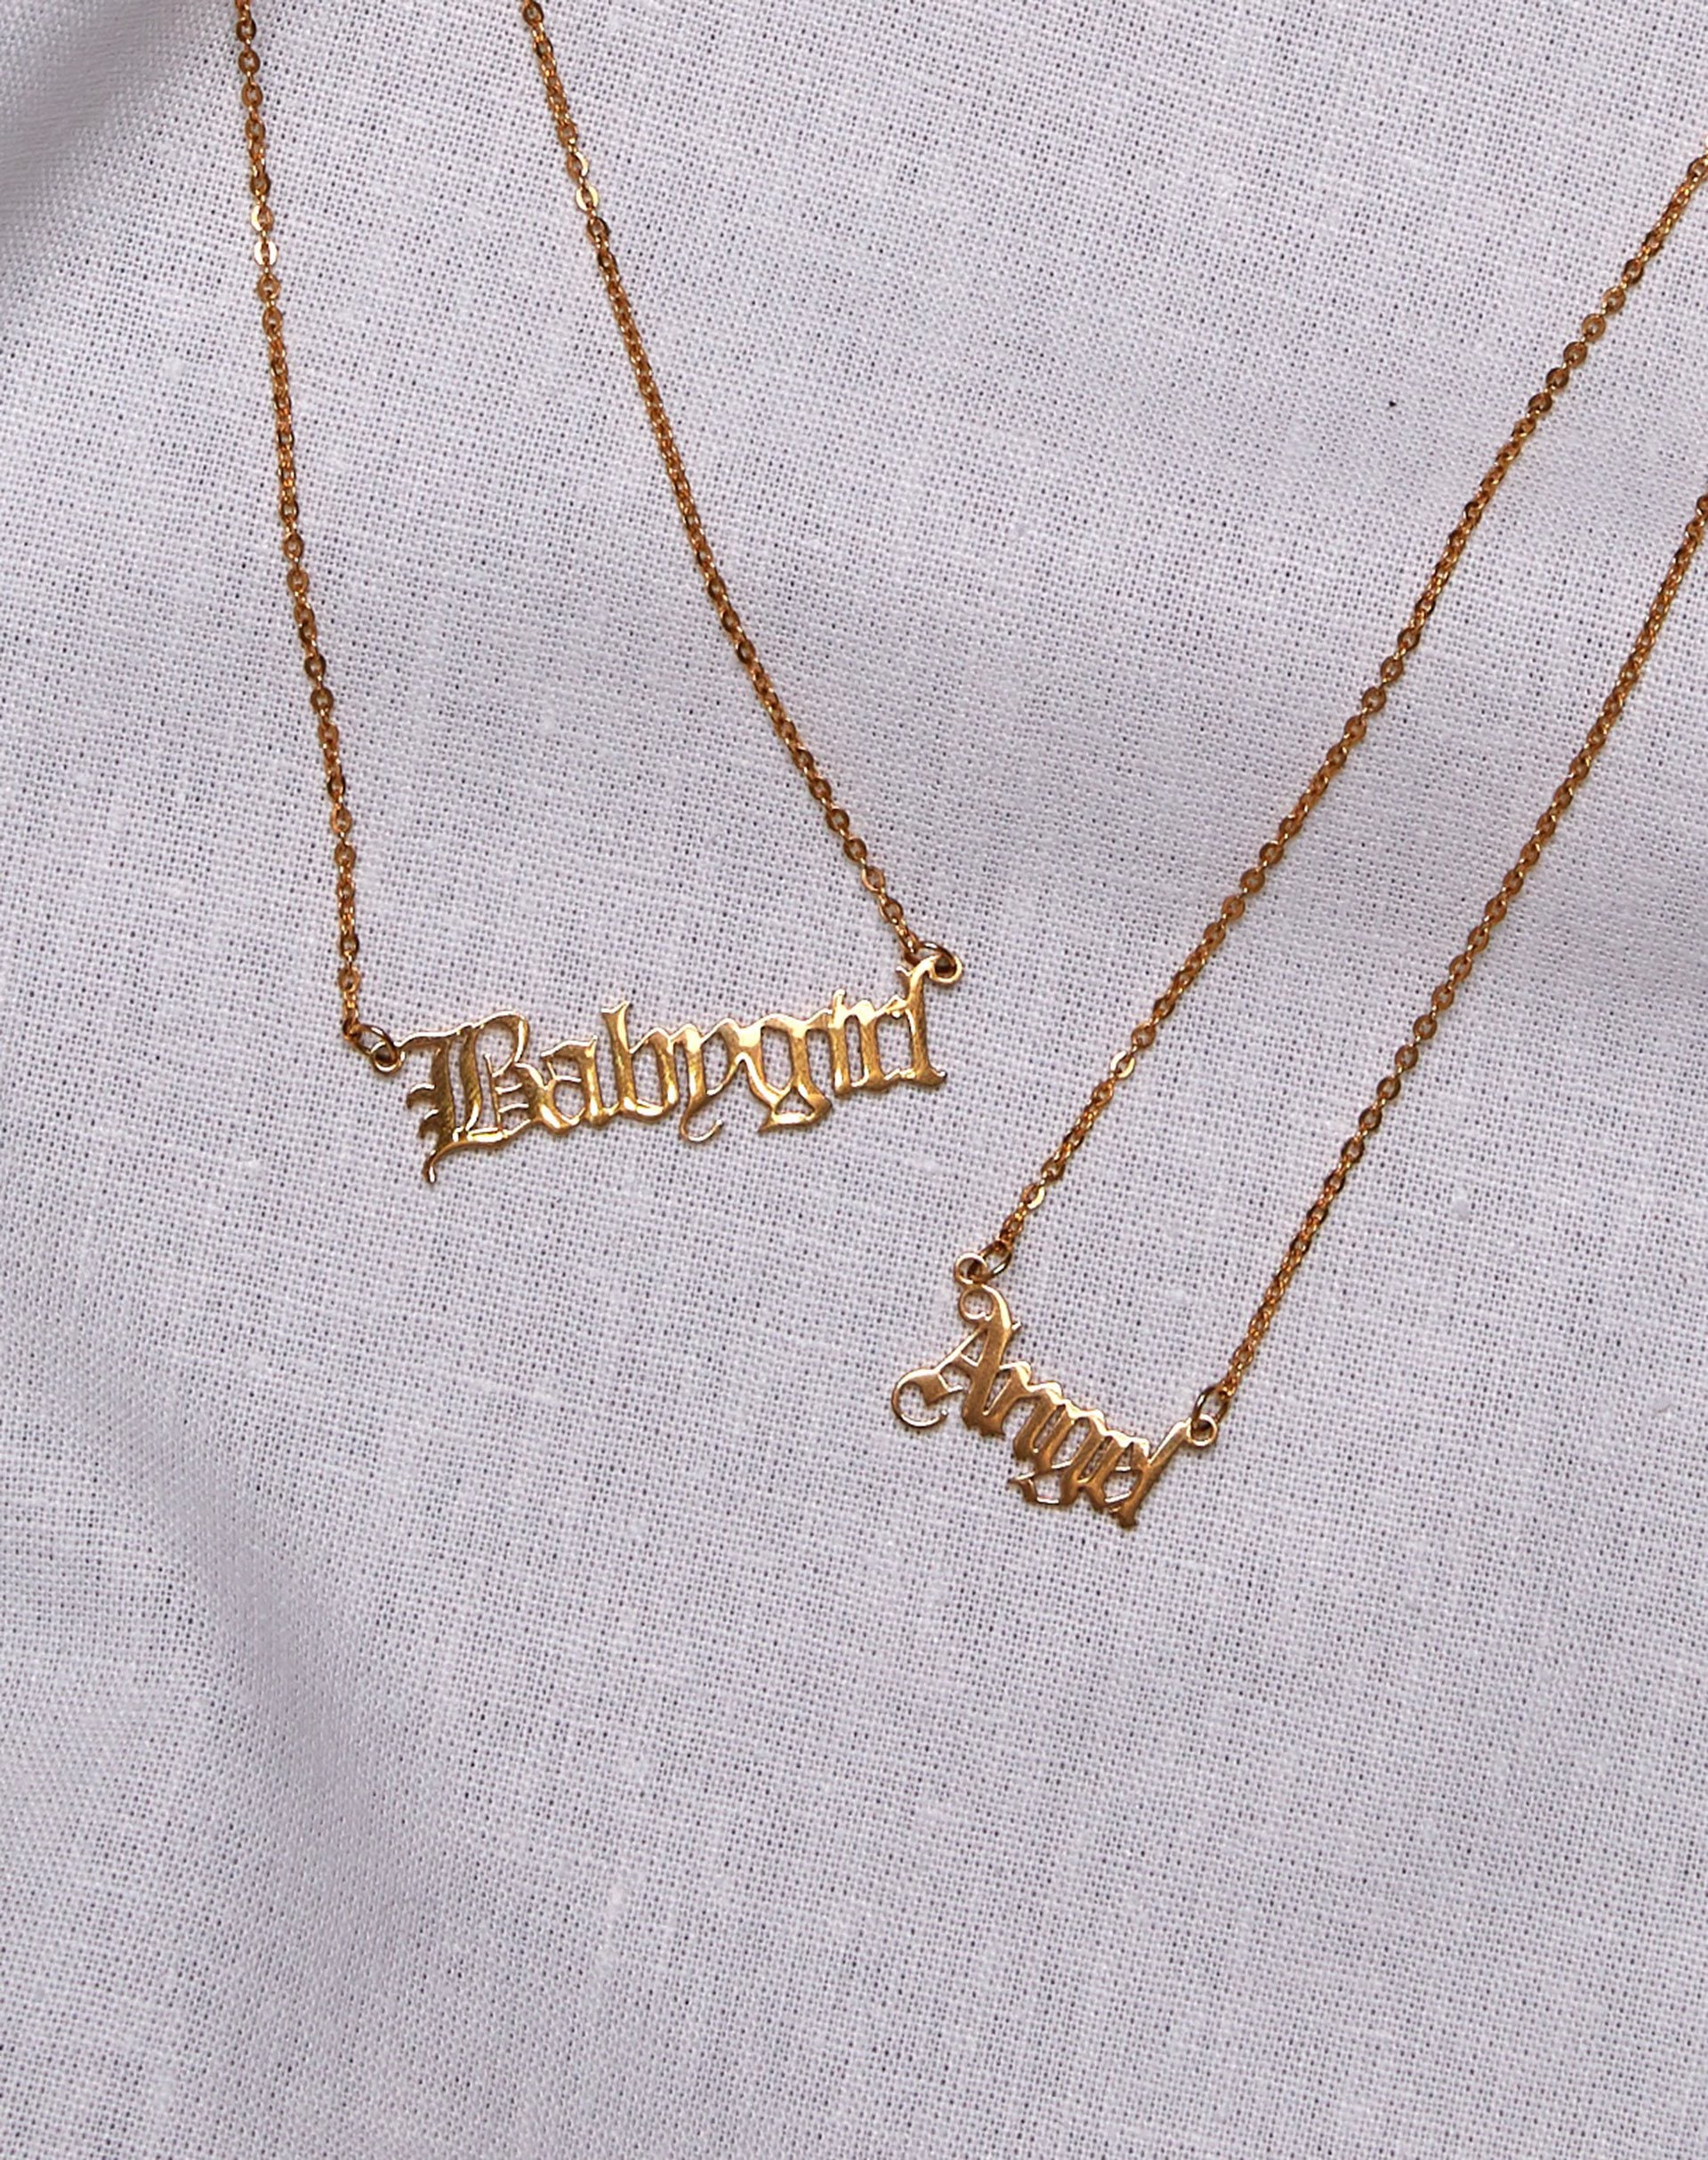 Baby Girl Cursive Chain Necklace | Babygirl necklace, Gold chain with  pendant, Necklace